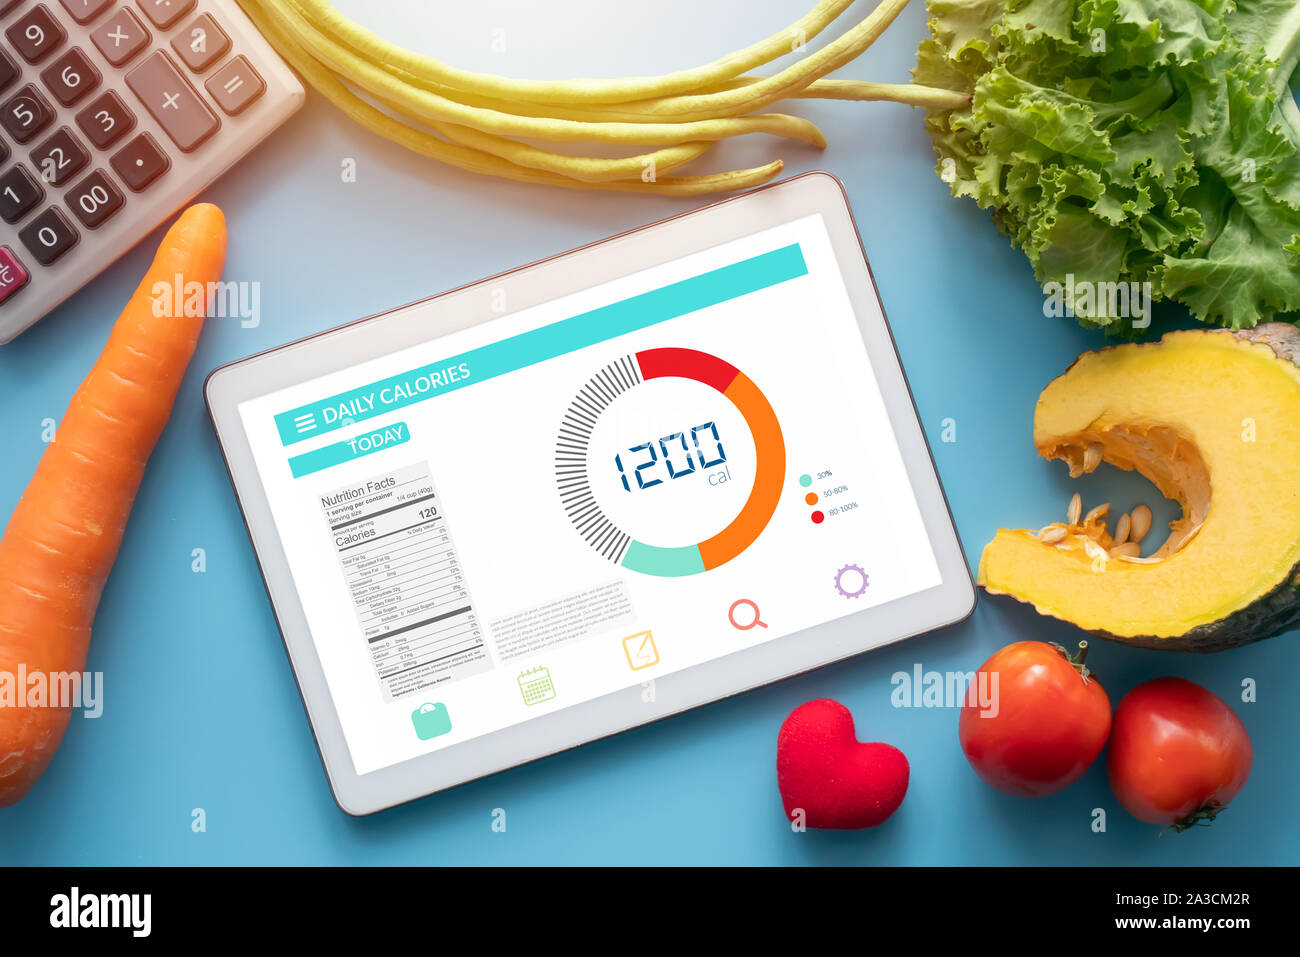 Calories counting , diet , food control and weight loss concept. tablet with Calorie counter application on screen at dining table with vegetable and Stock Photo